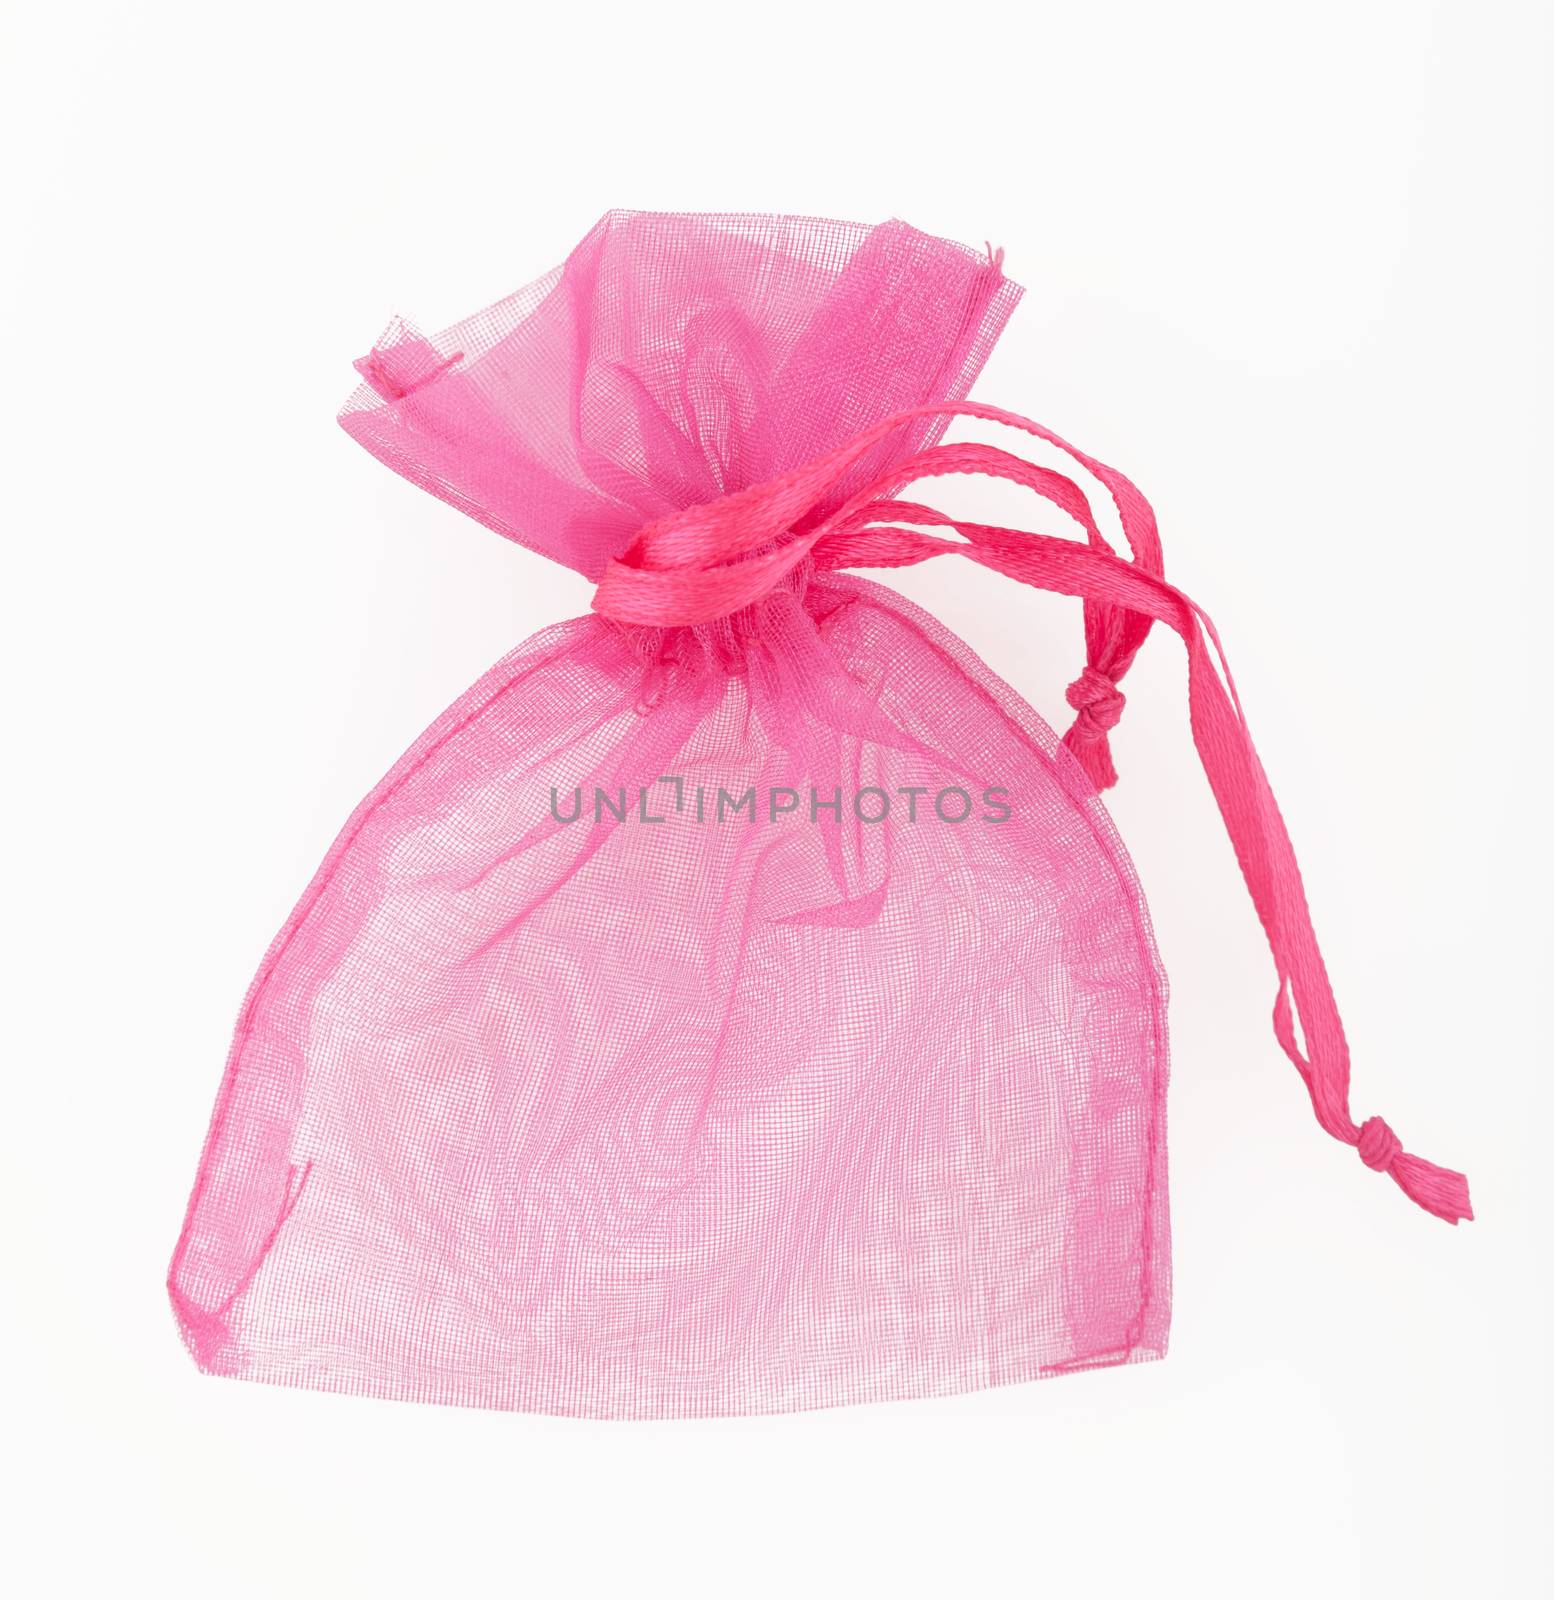 Small transparent gift bag in pink color on white background